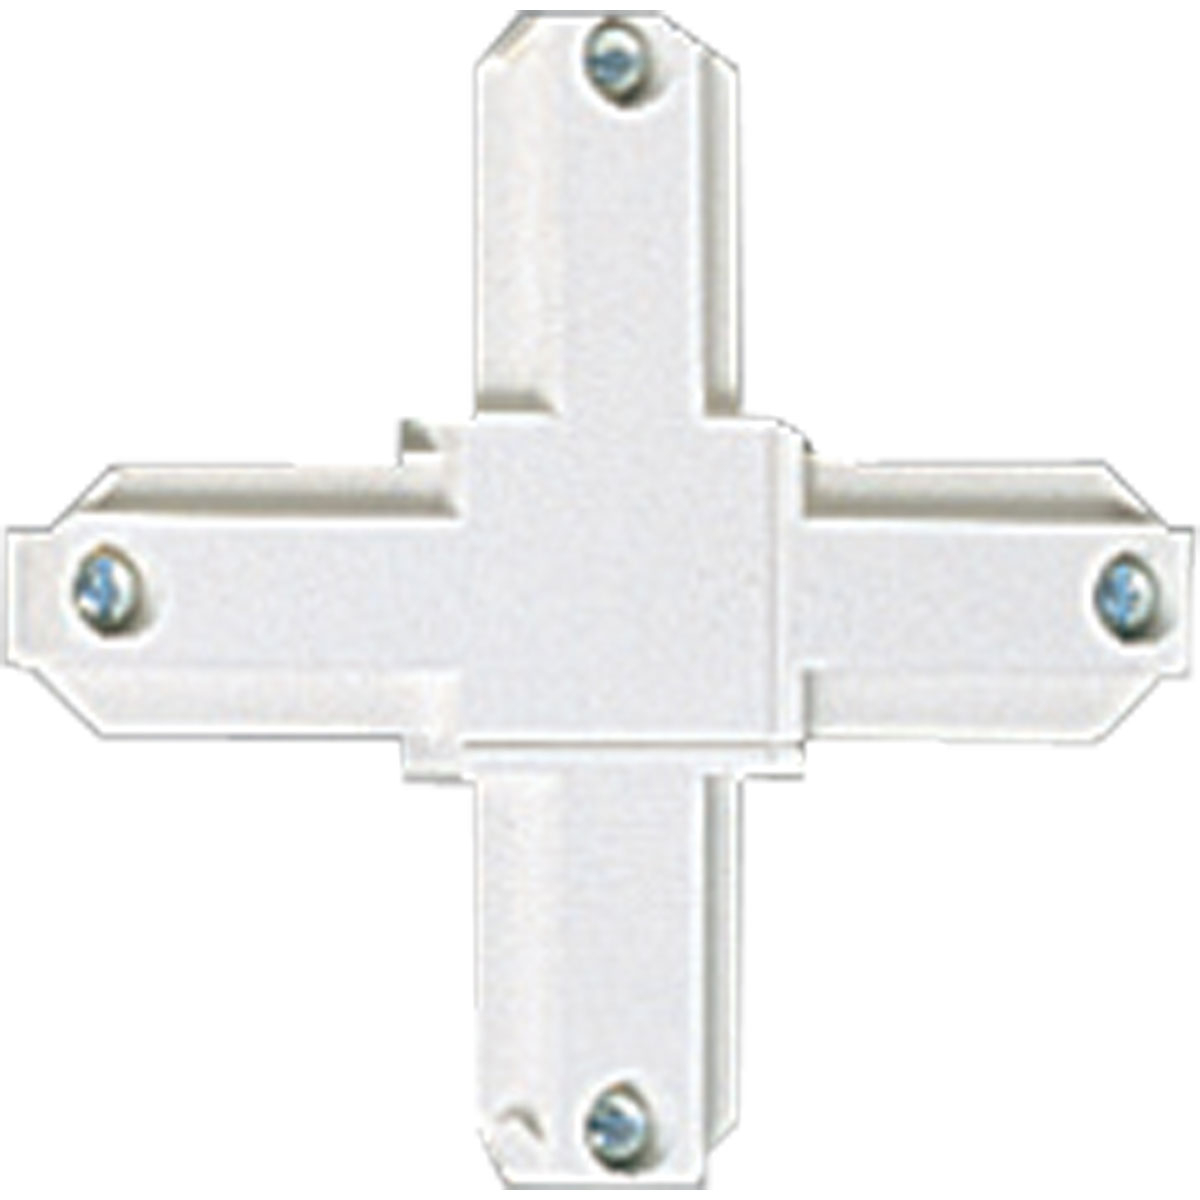 Cross connector for joining two or more track sections. The connectors plug into track sections only one way to ensure positive polarization. White finish.